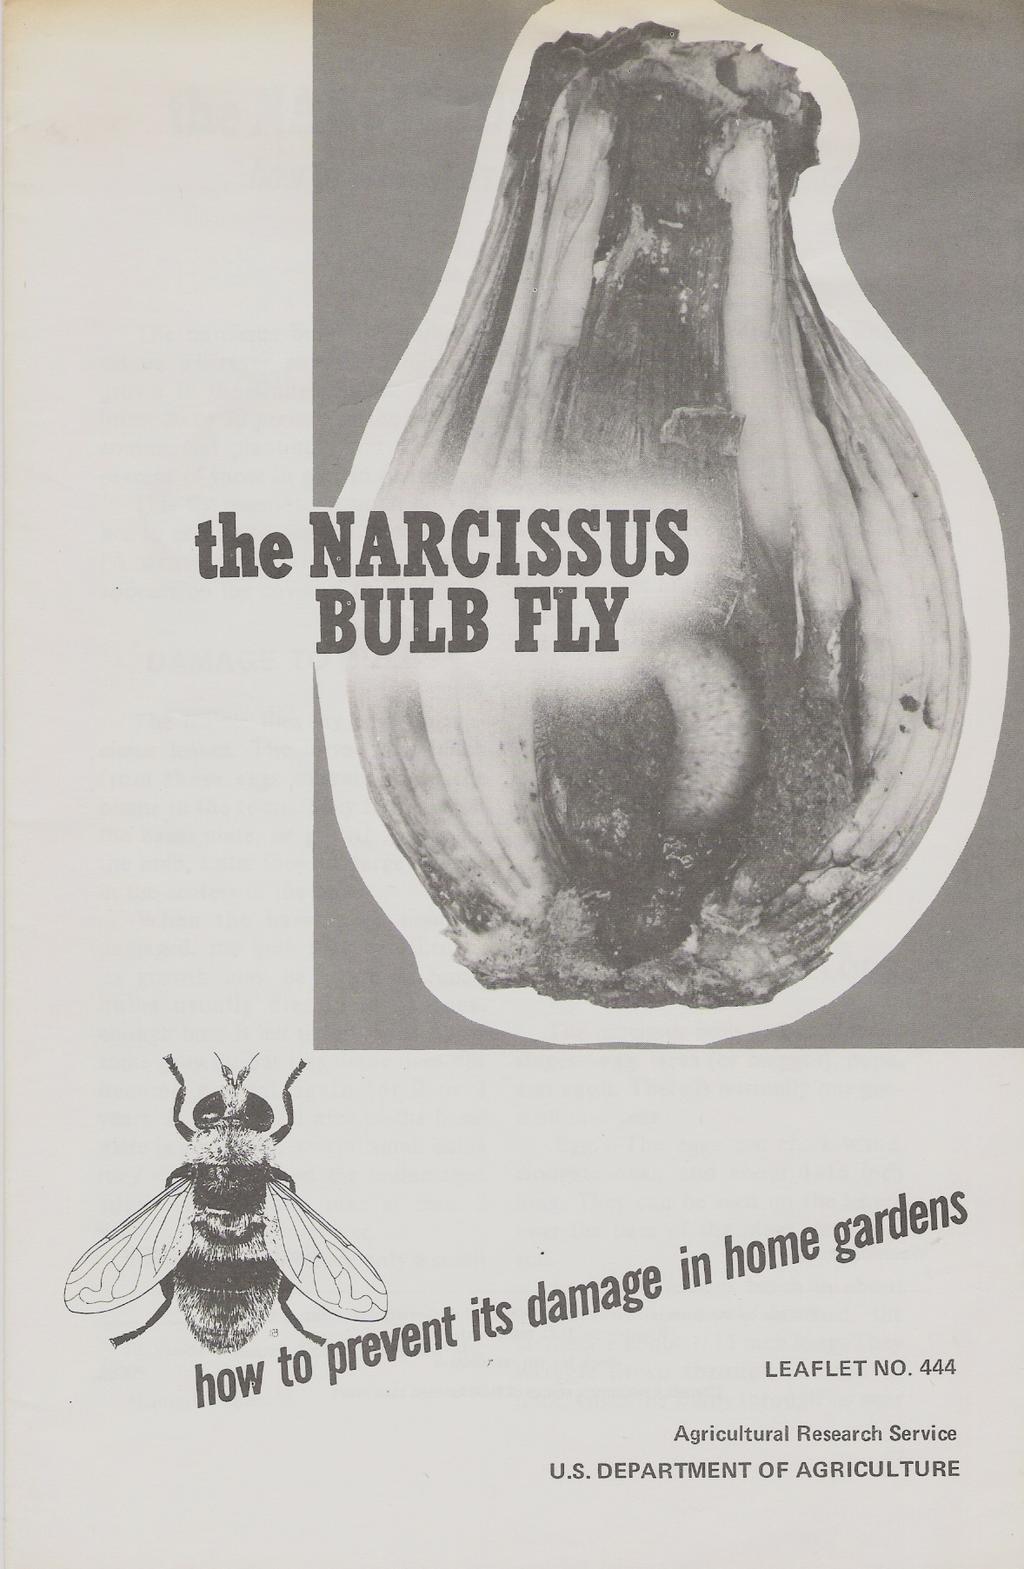 , the NARCISSUS BULB FLY.